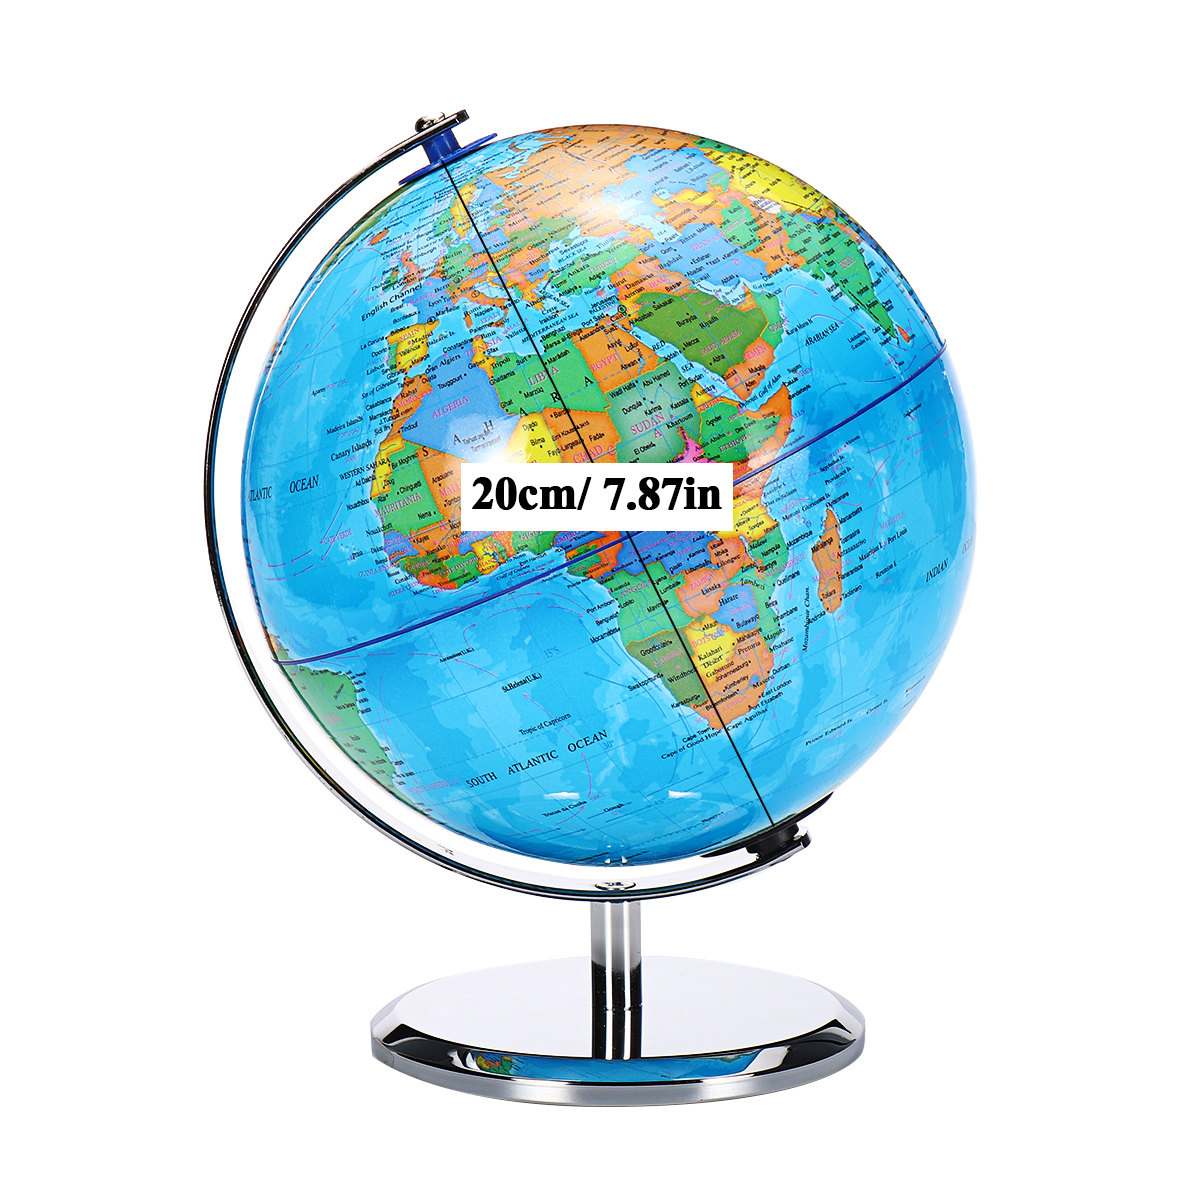 8inch-Stand-Rotating-World-Globe-Map-Kids-Toy-School-Student-Educational-Gift-1783975-7